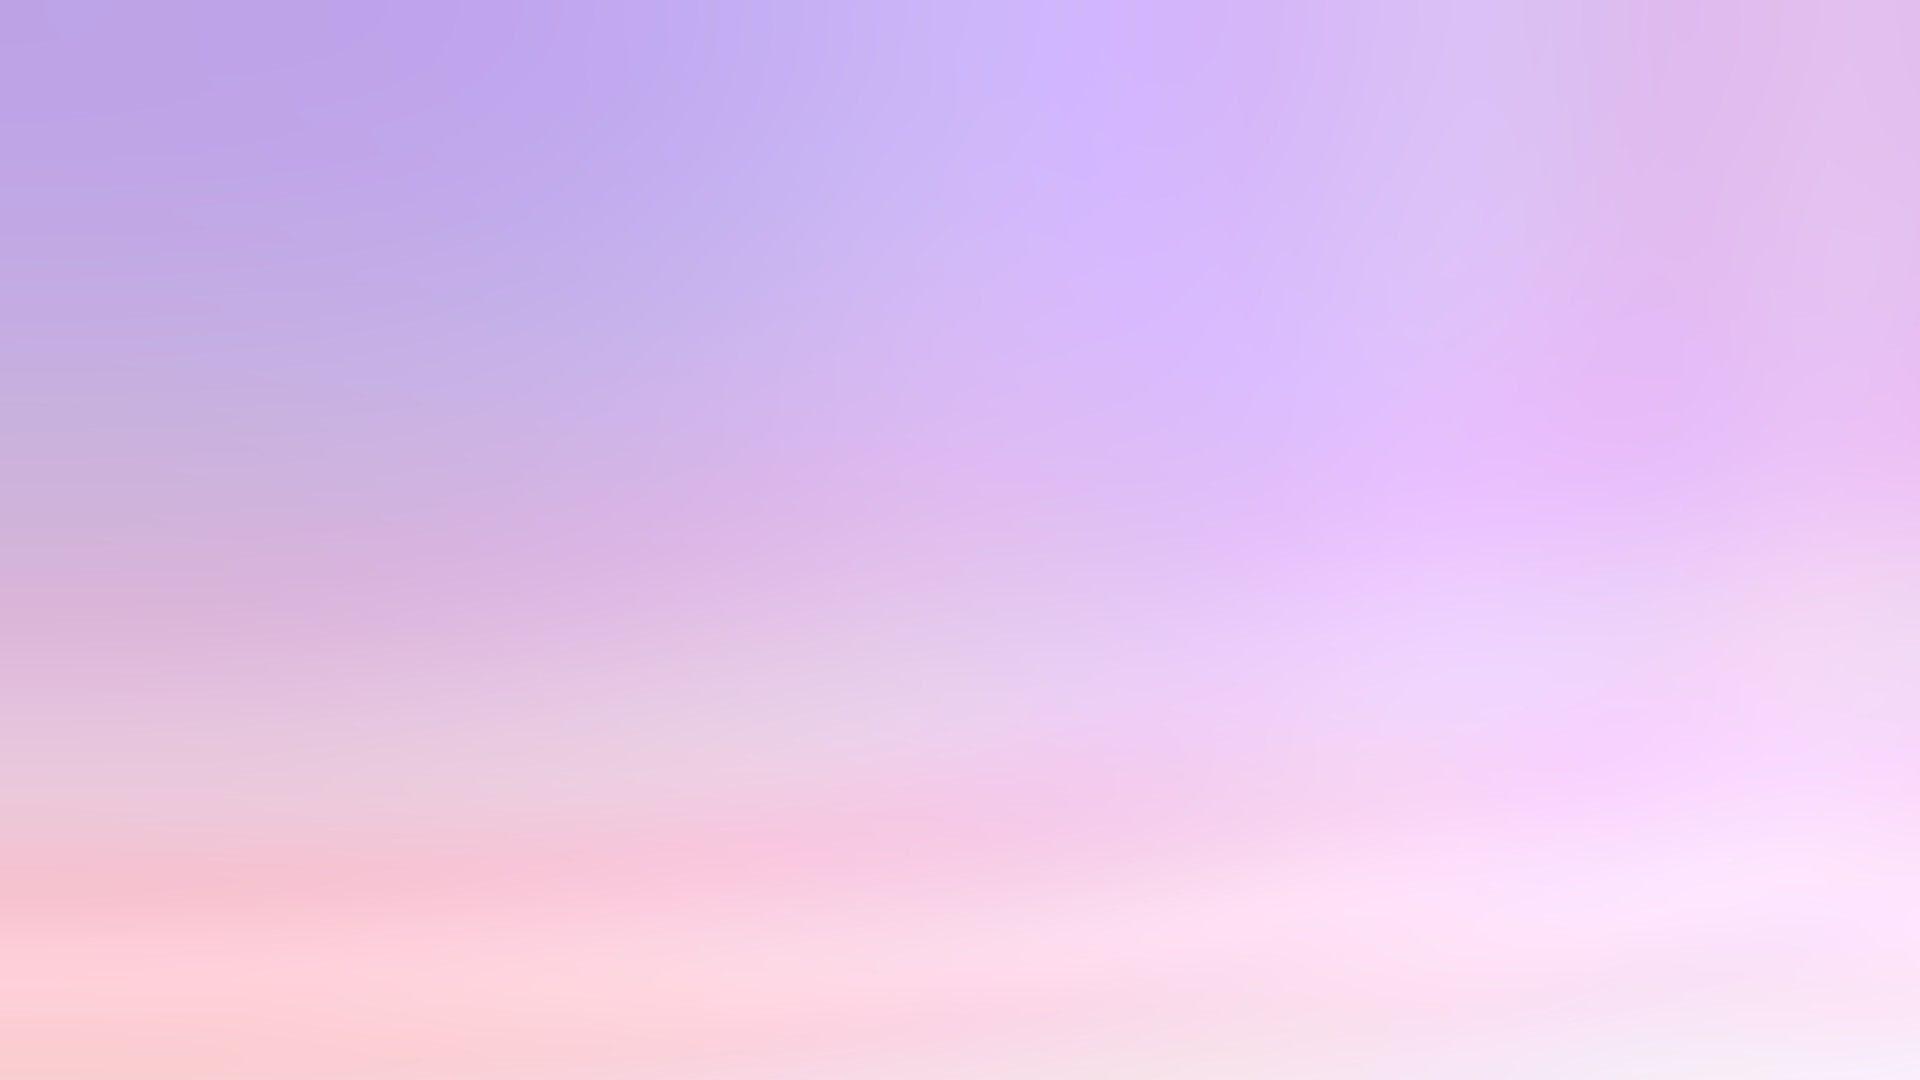 Pink And Purple Pictures  Download Free Images on Unsplash